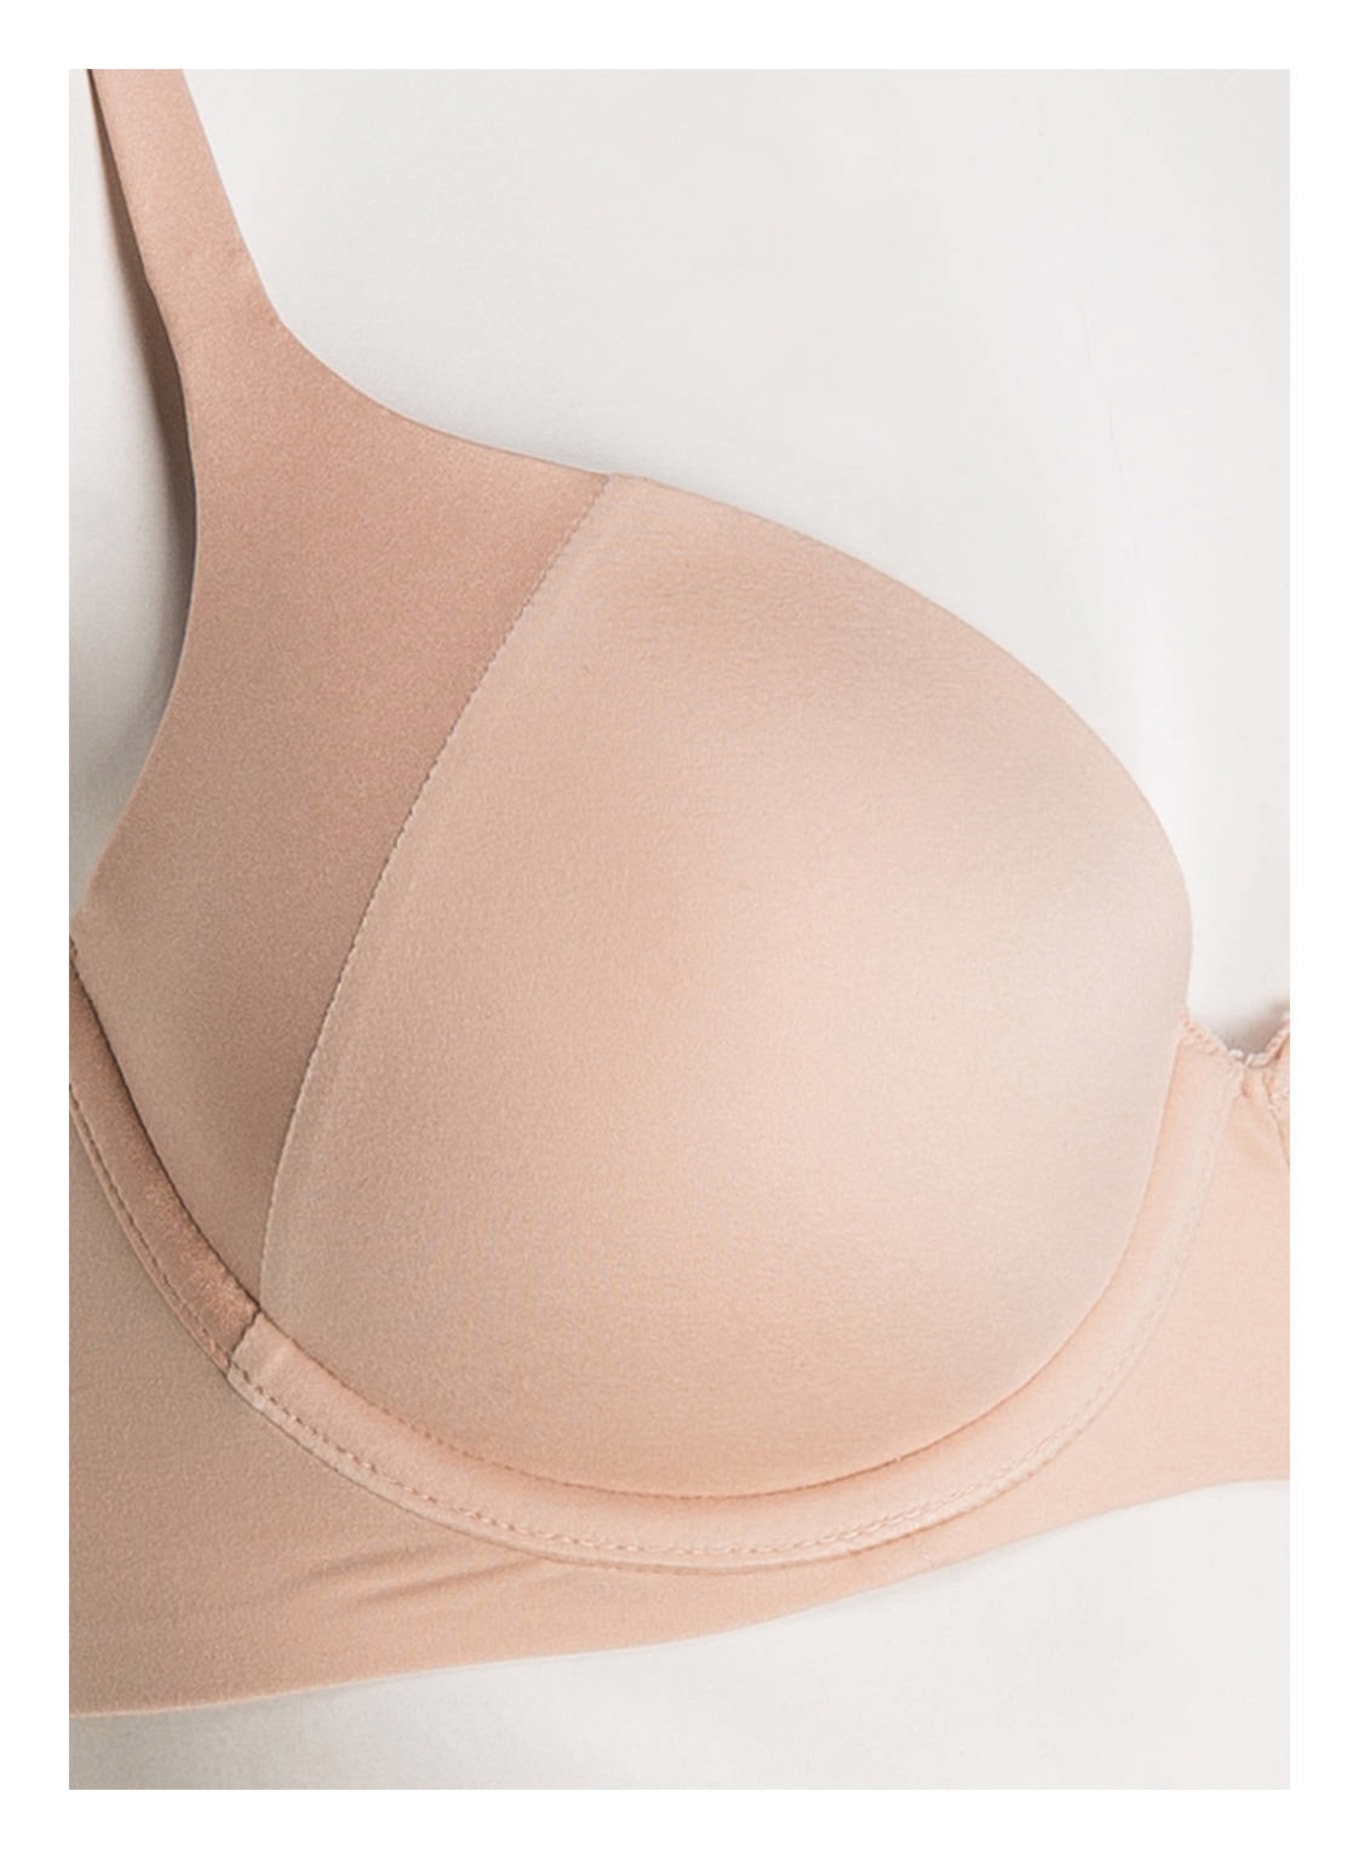 Triumph Cup bra BODY MAKE-UP SOFT TOUCH, Color: NUDE (Image 4)